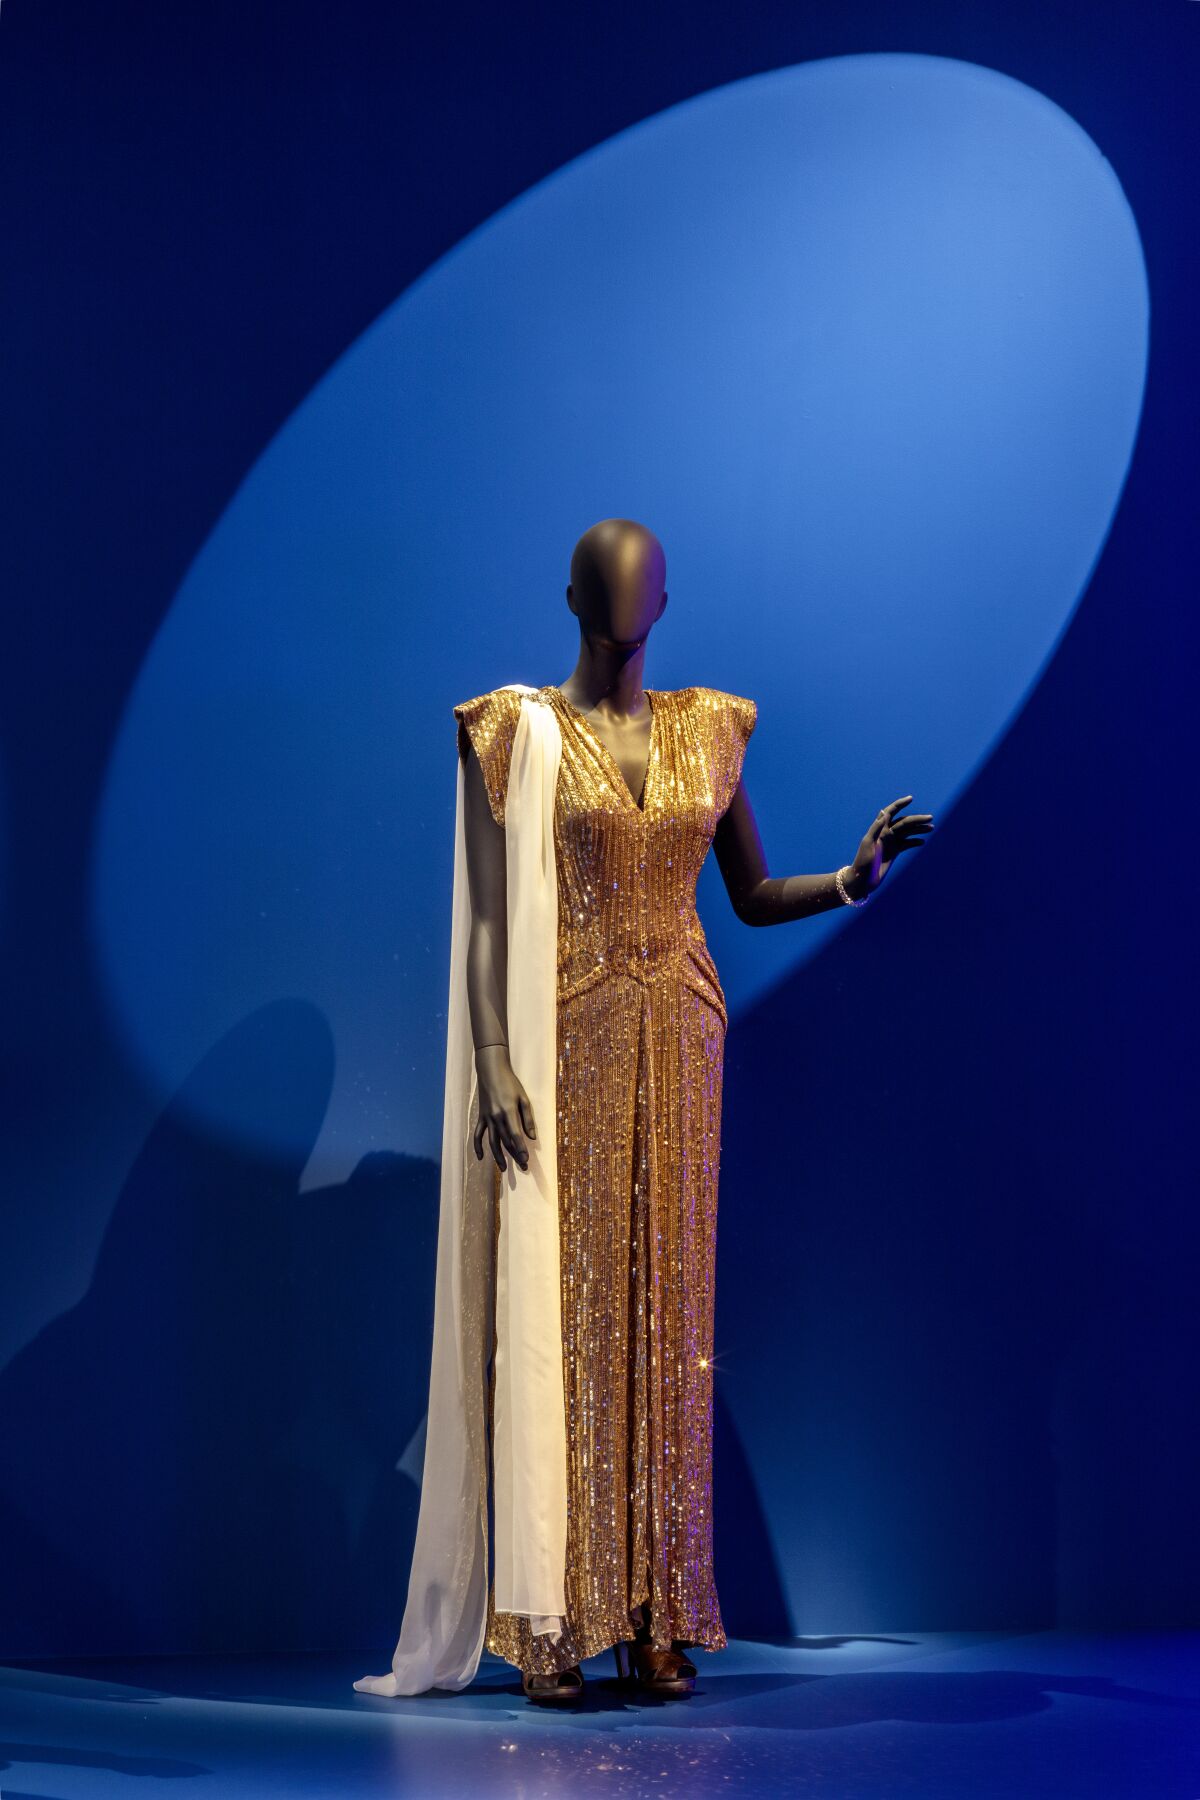 A mannequin wearing a glamorous dress.